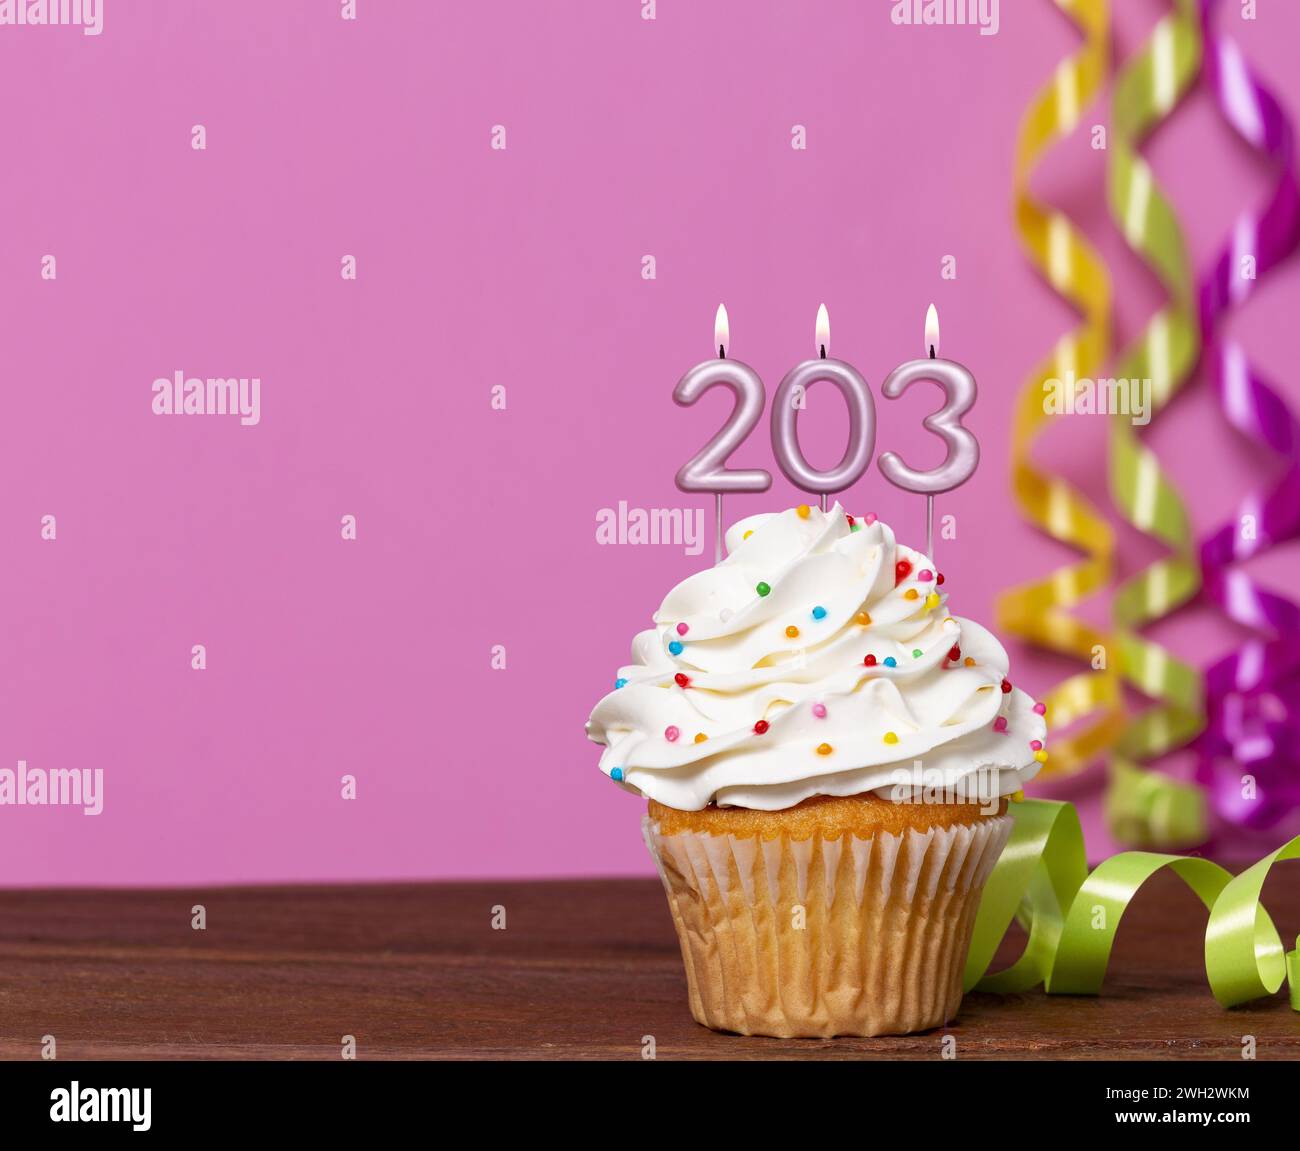 Birthday Cake With Candle Number 203 - On Pink Background. Stock Photo